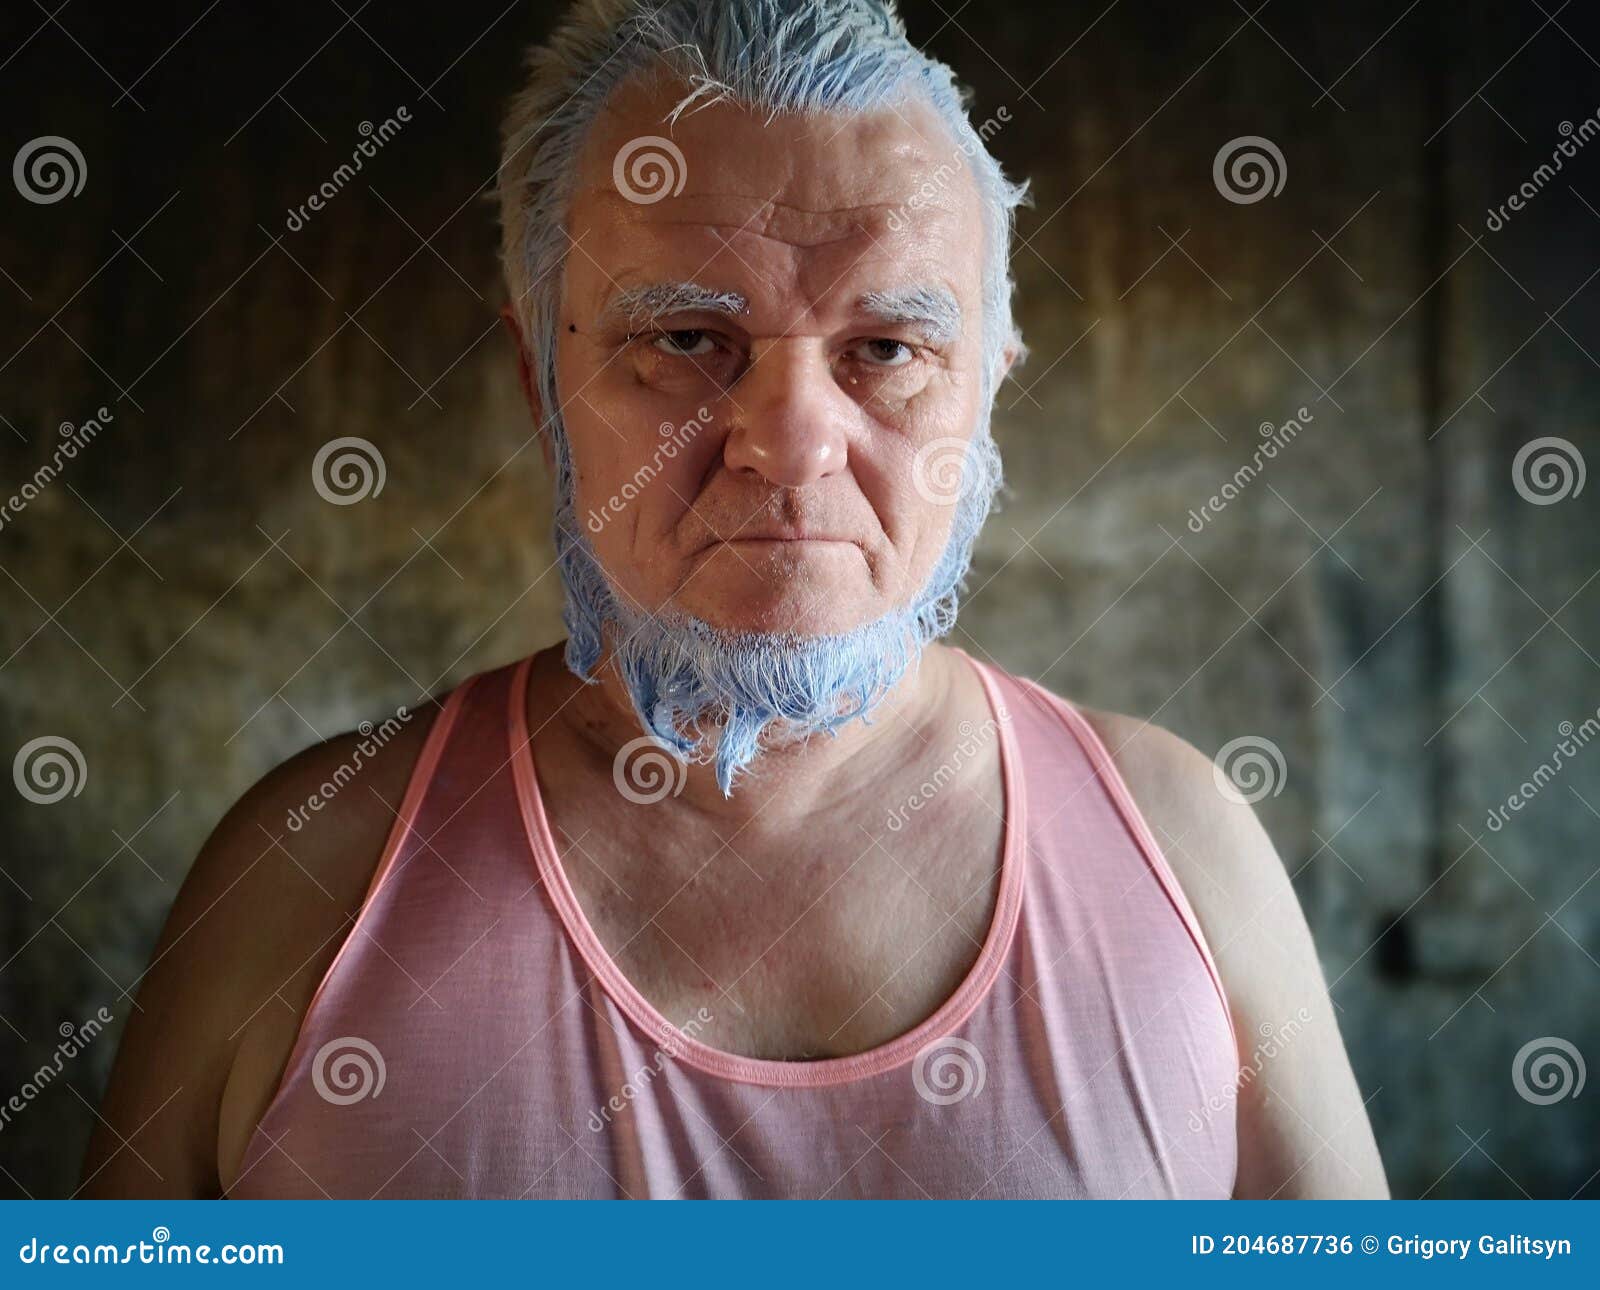 Man with blue hair and beard - wide 8